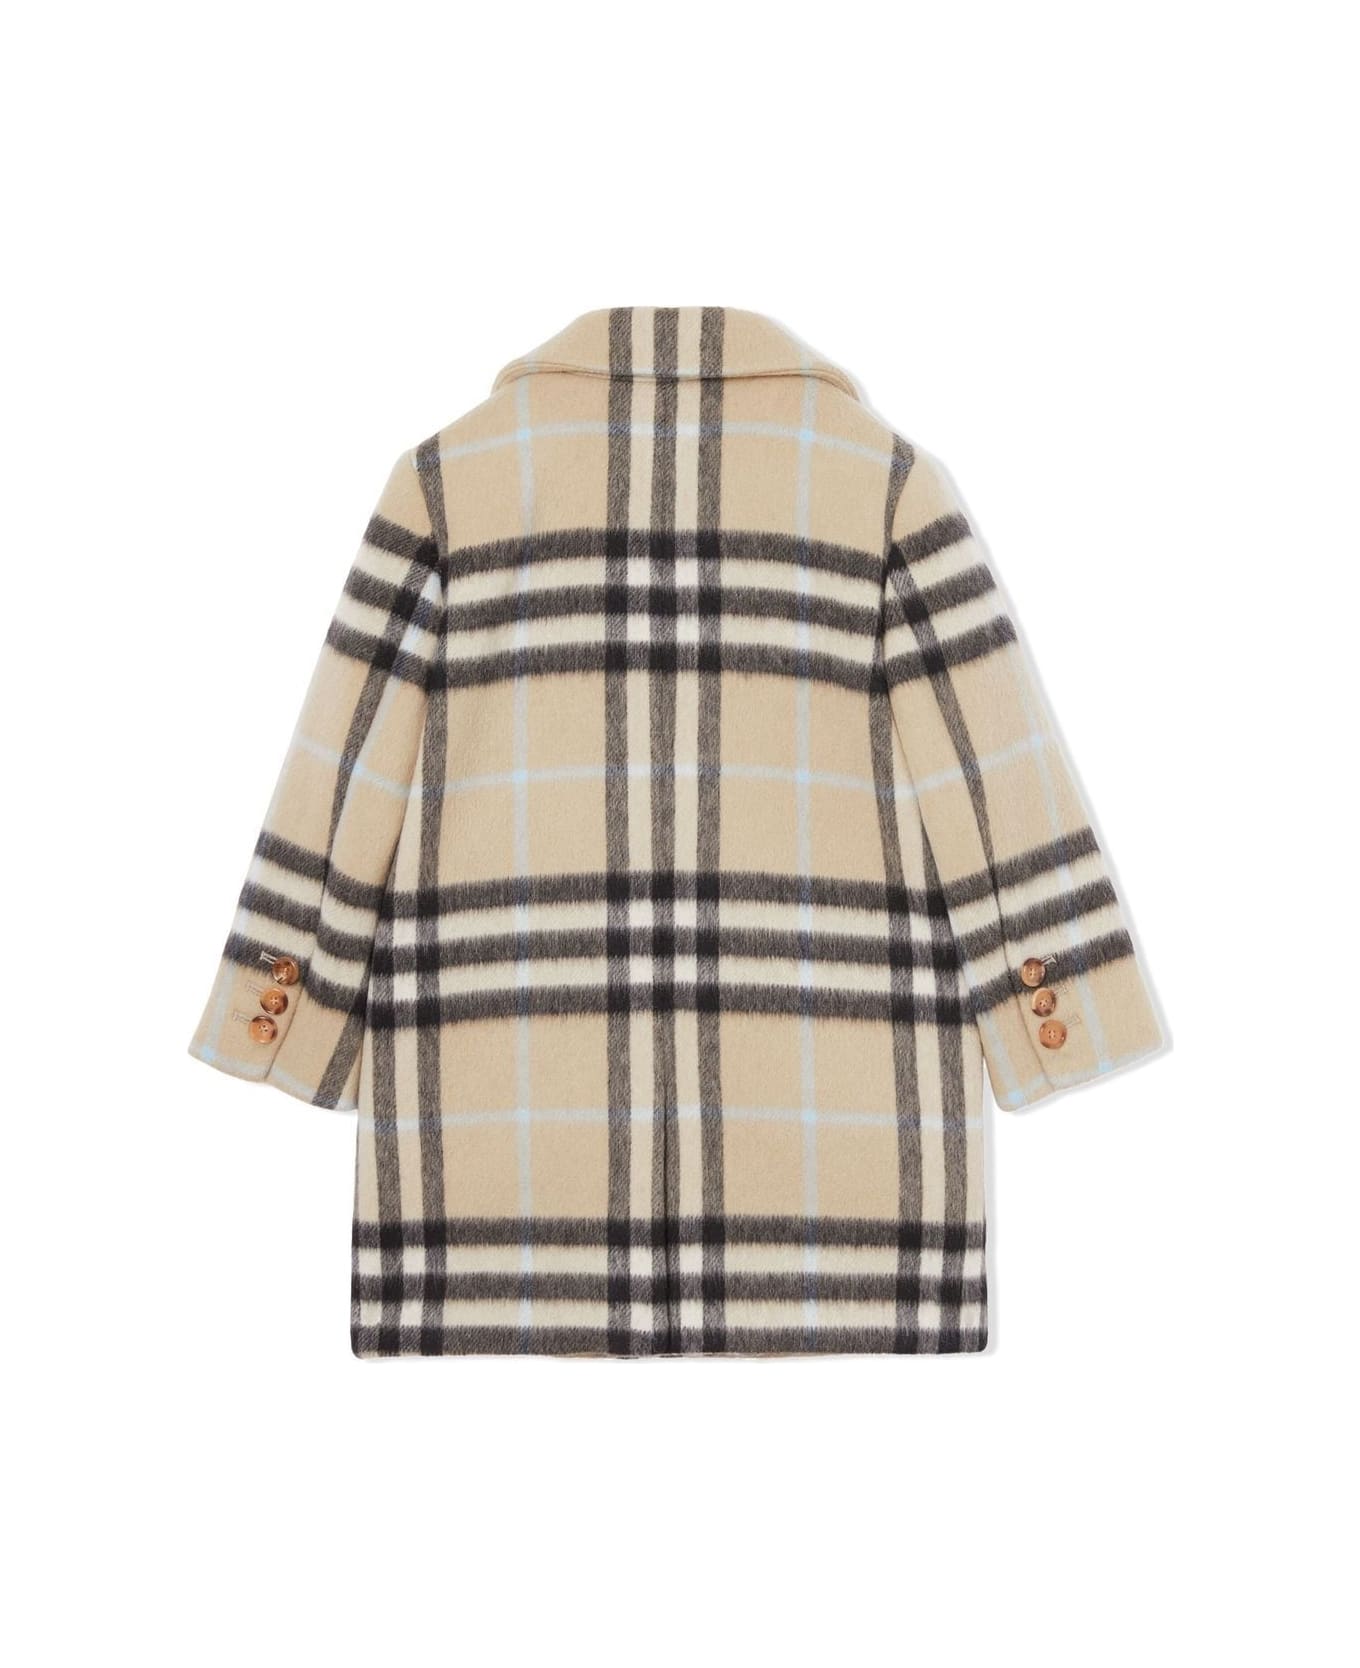 Burberry Poppy Checked Coat - Glamorous long sleeve mini sweater dress with tie waist in blue